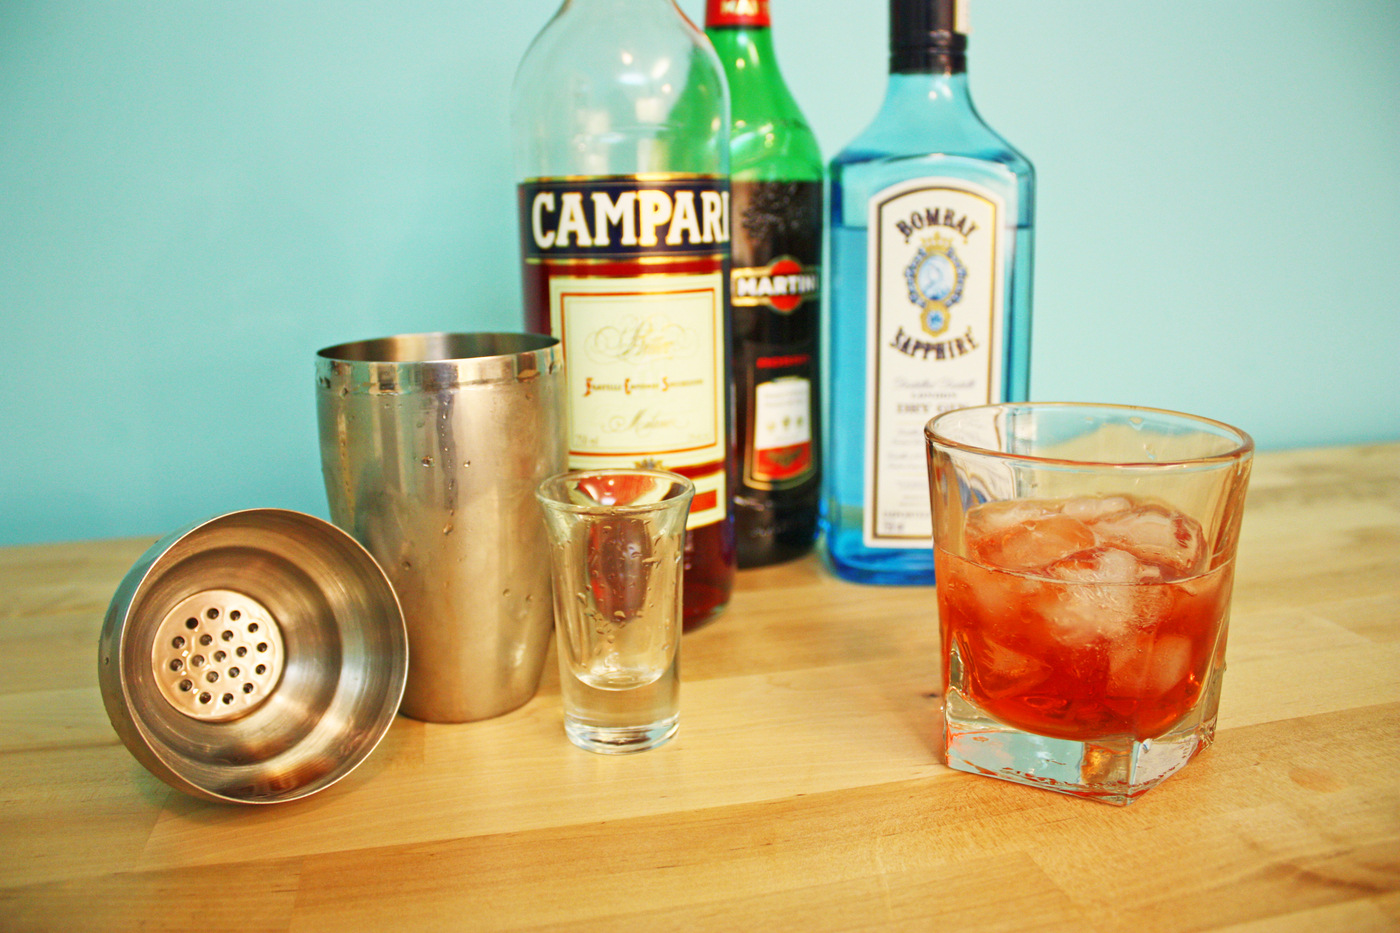 Negroni cocktail ingredients : gin, Campari, and sweet vermouth